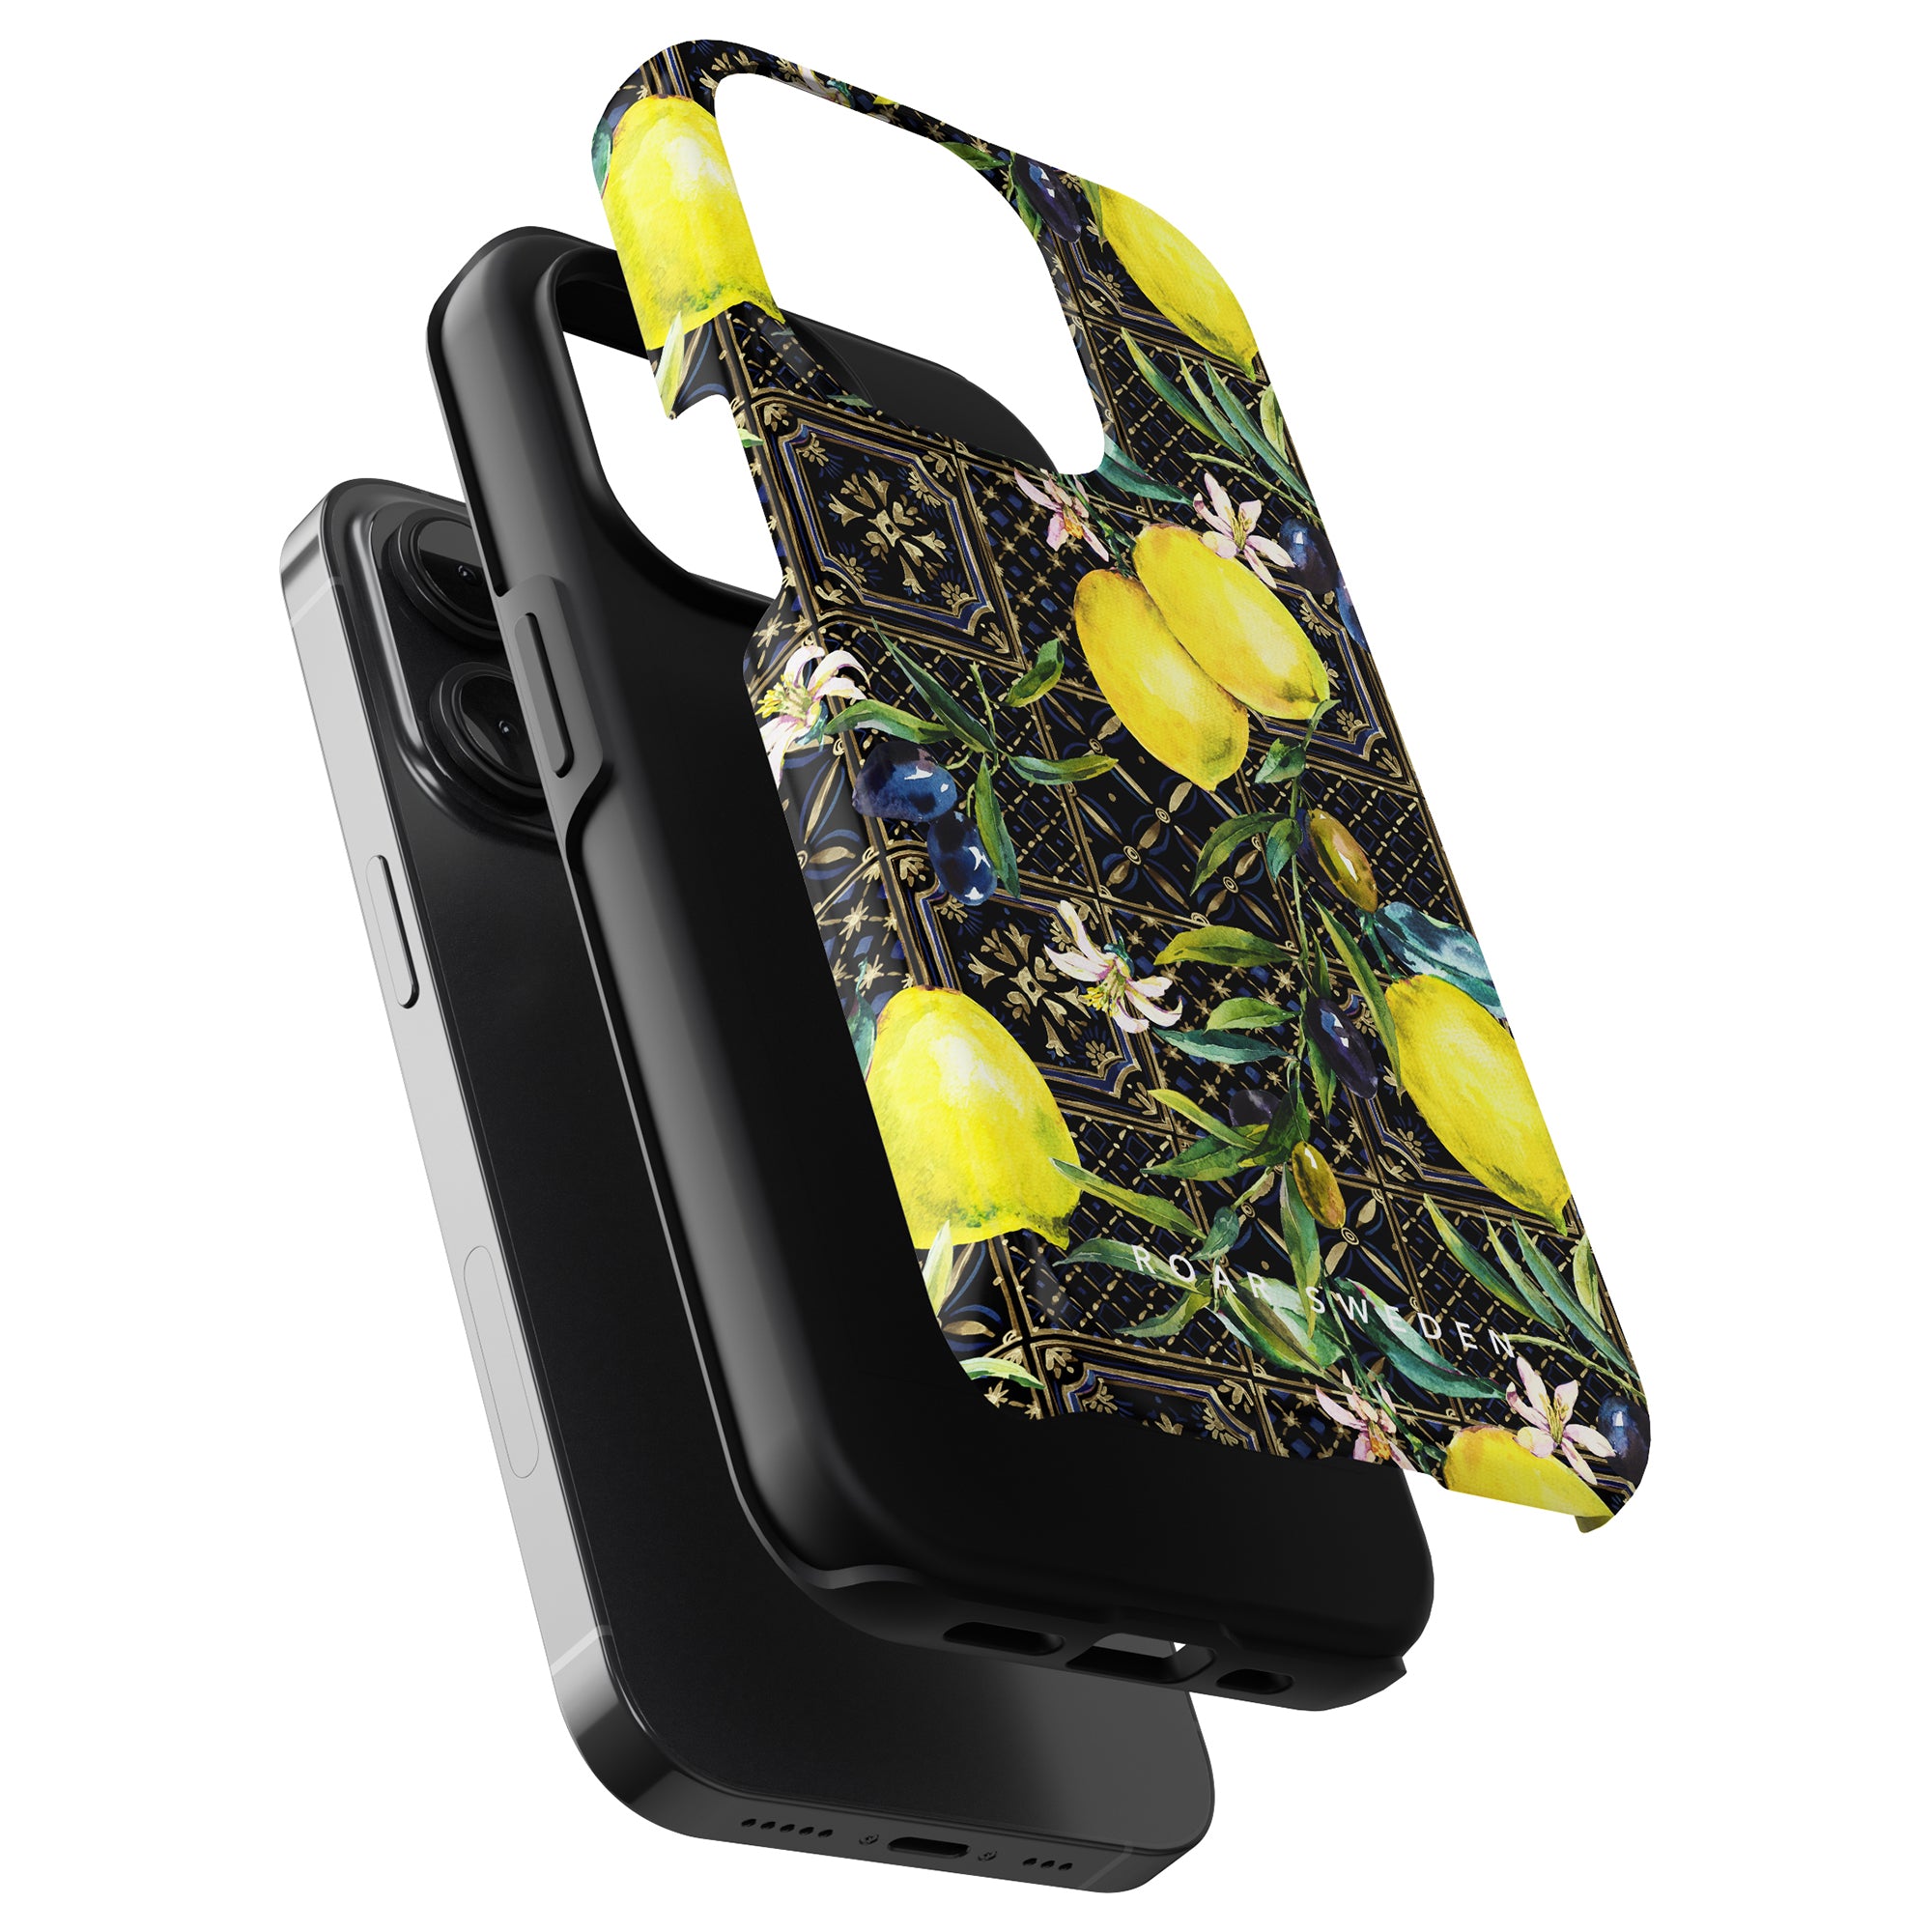 A black smartphone with a Sorrento - Tough Case featuring a lemon pattern, attached to a matching lanyard made from organic cotton.